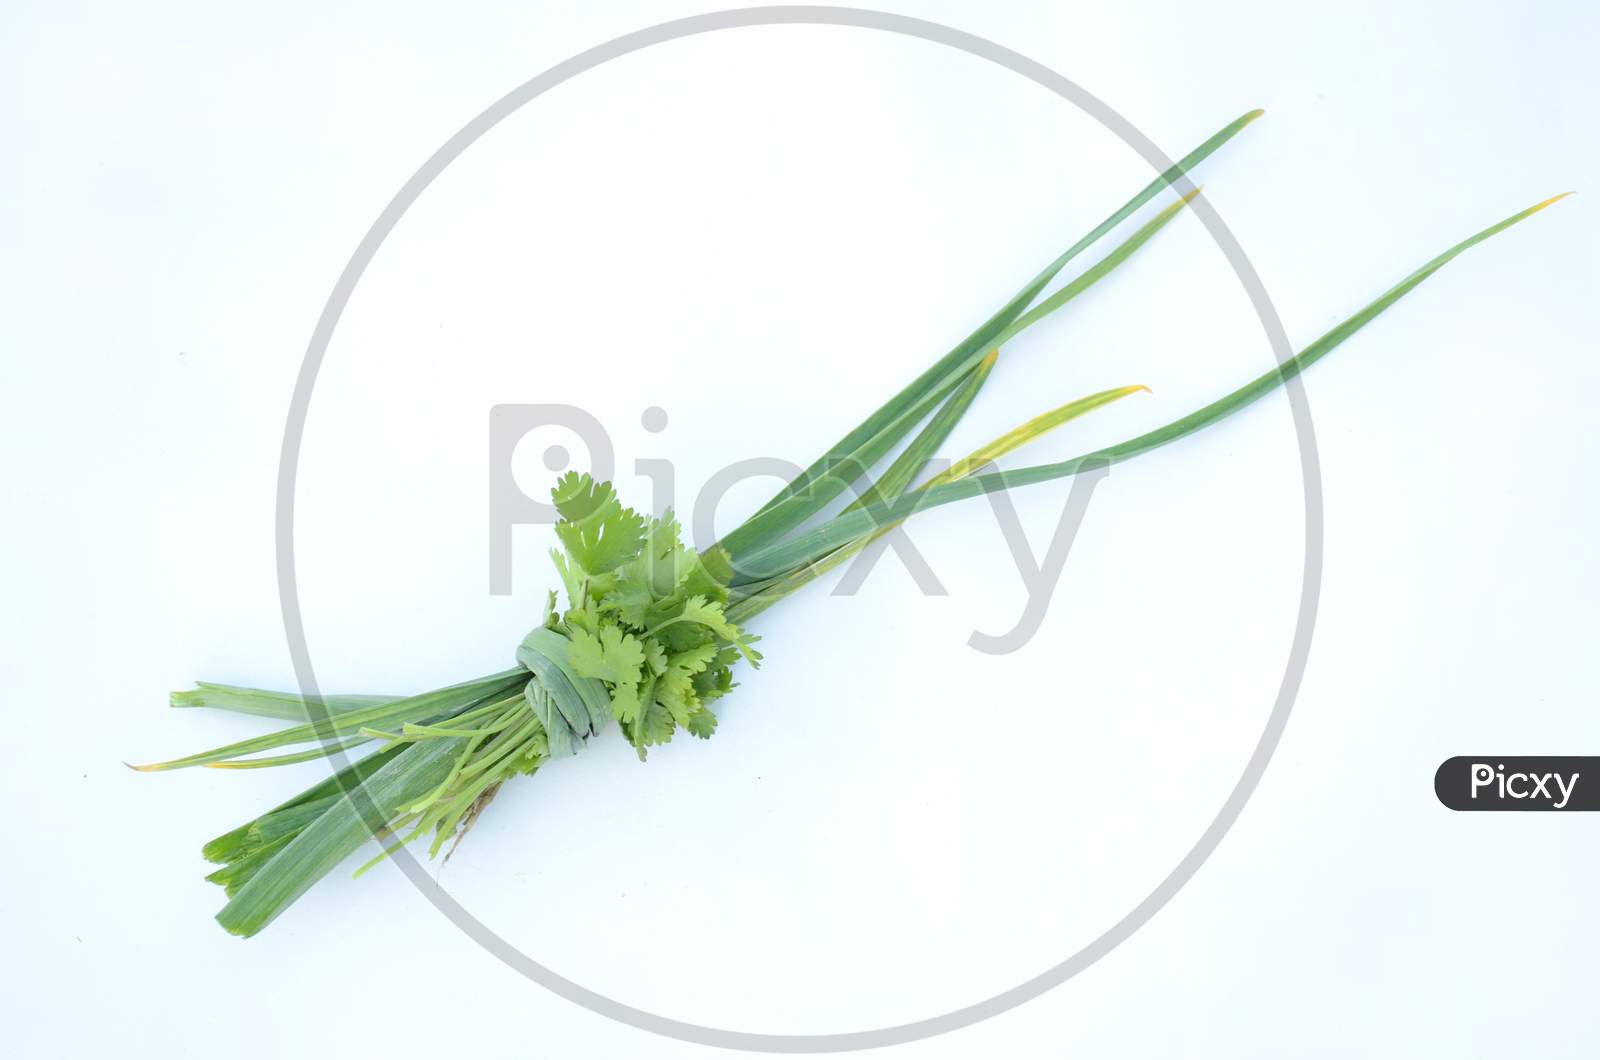 The Green Ripe Garlic Leaves With Coriander Isolated On White Background.